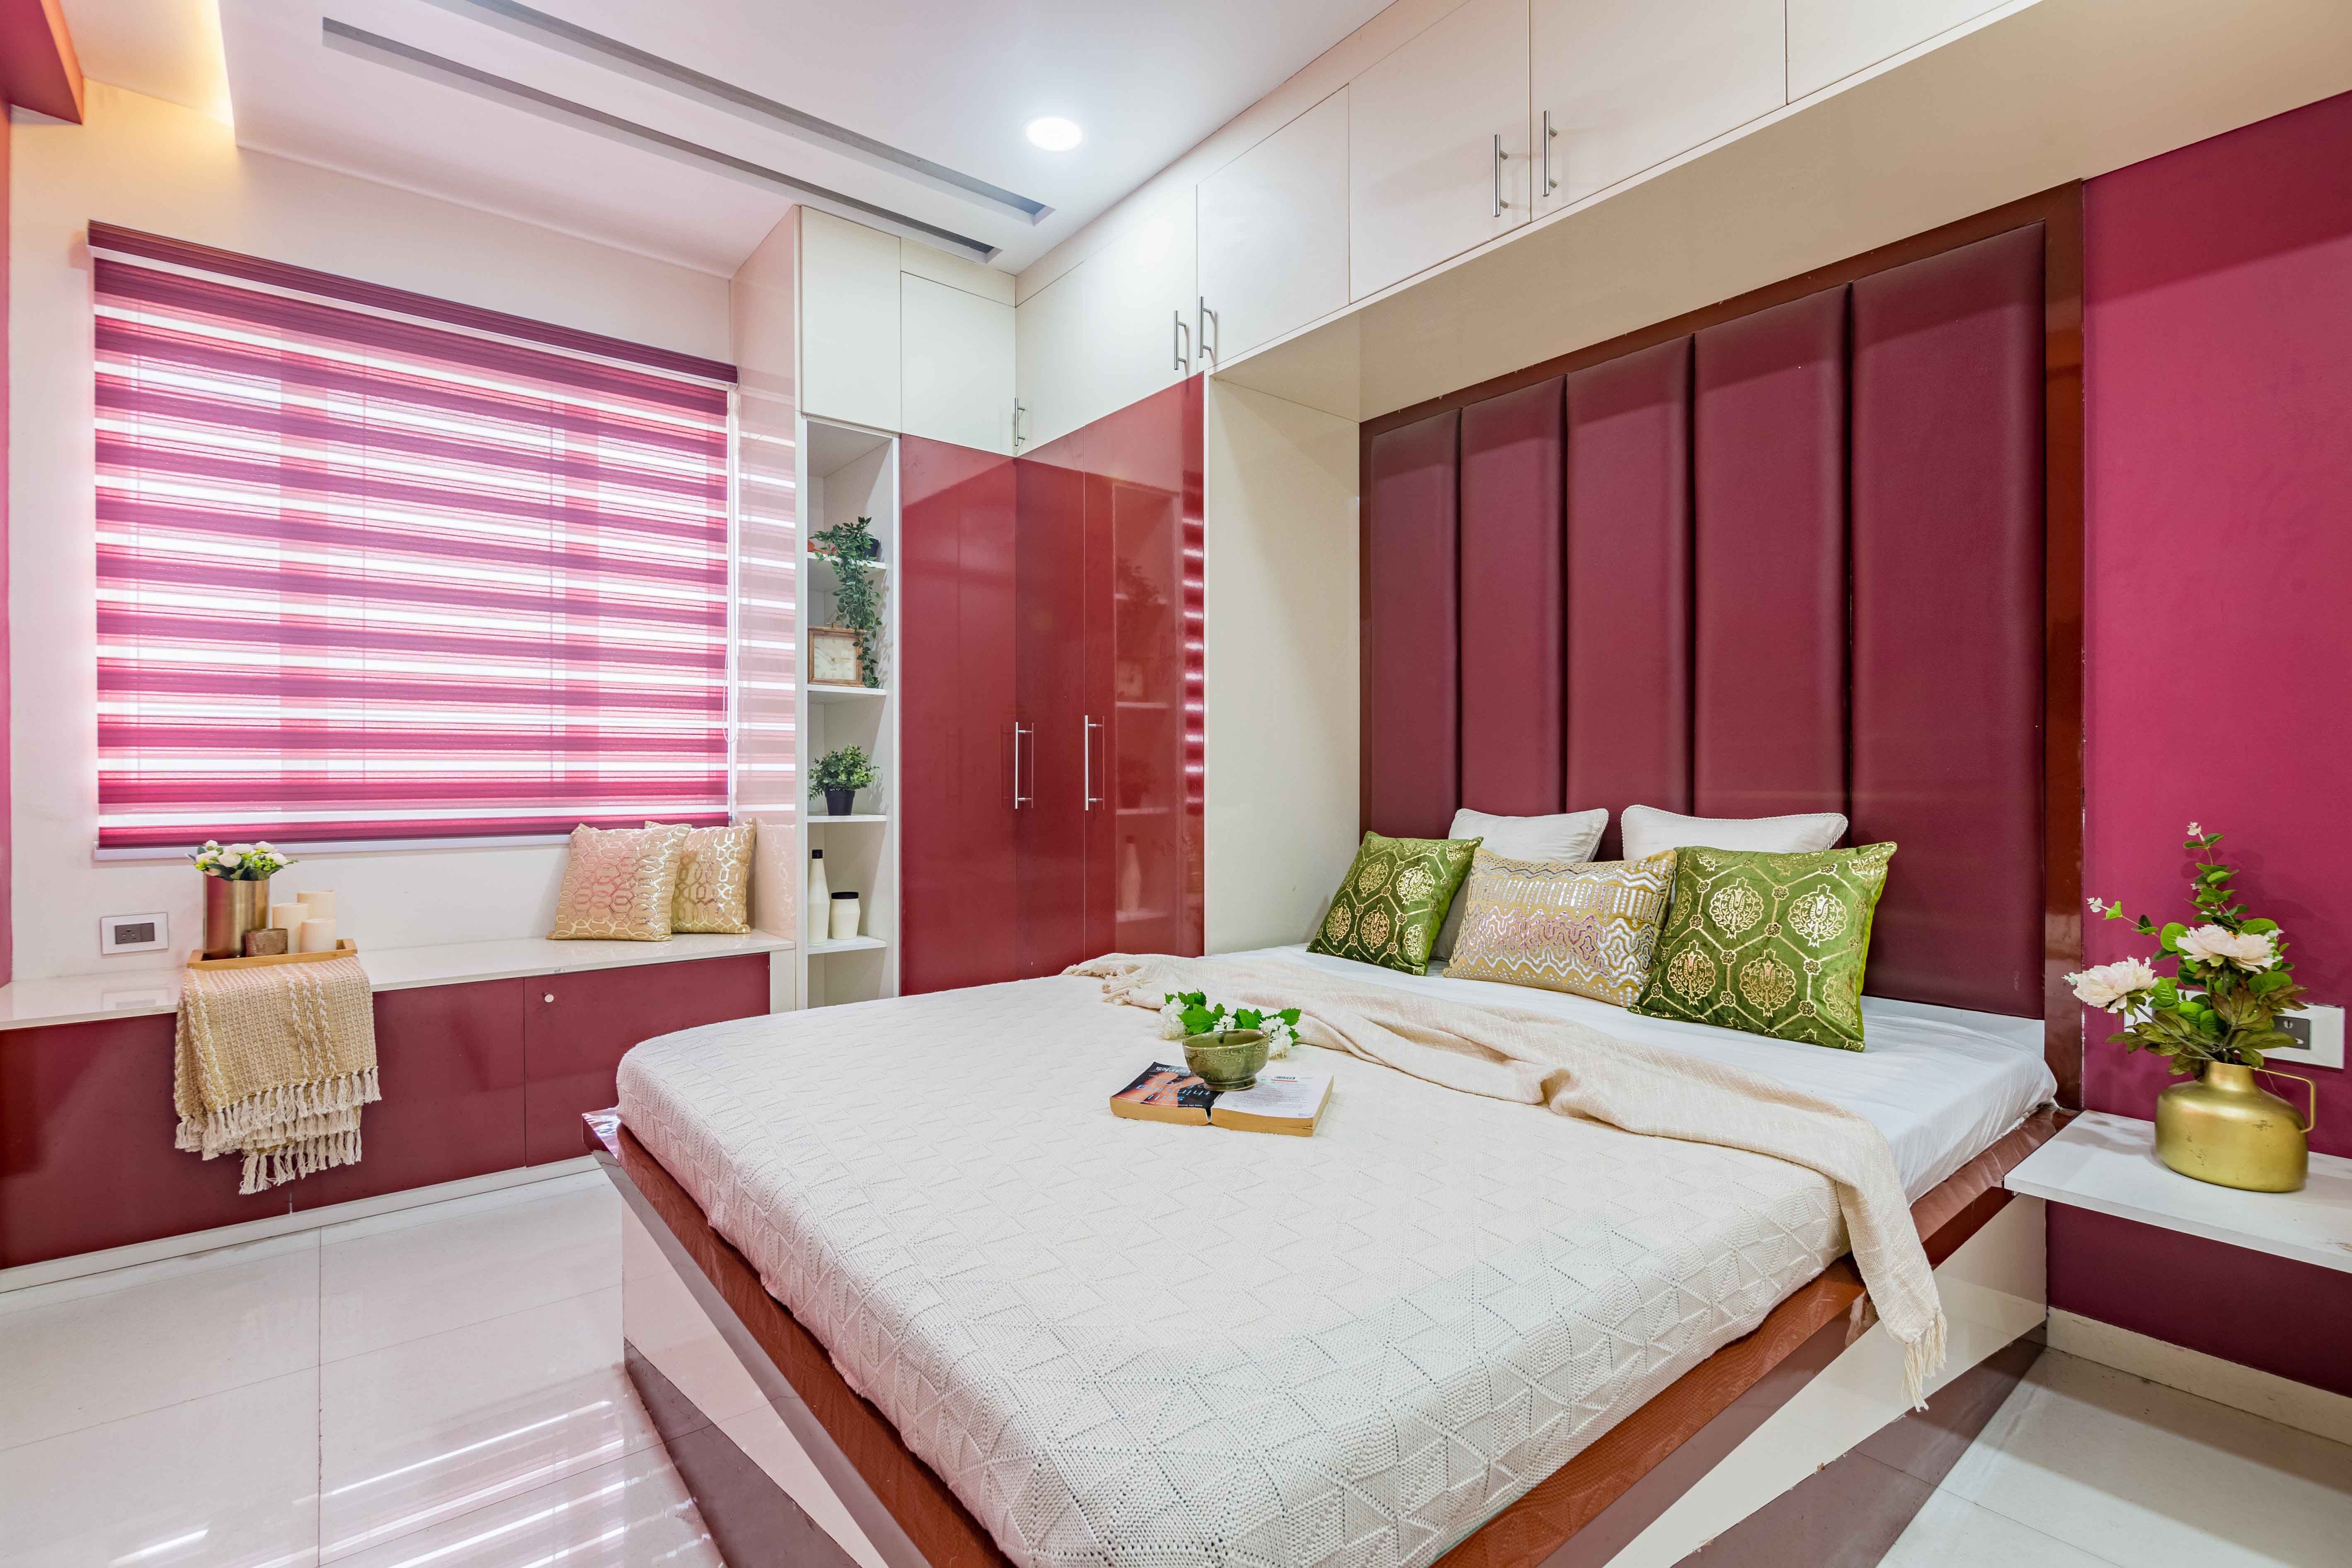 Contemporary 1-BHK Flat In Hyderabad With Pink Master Bedroom Design